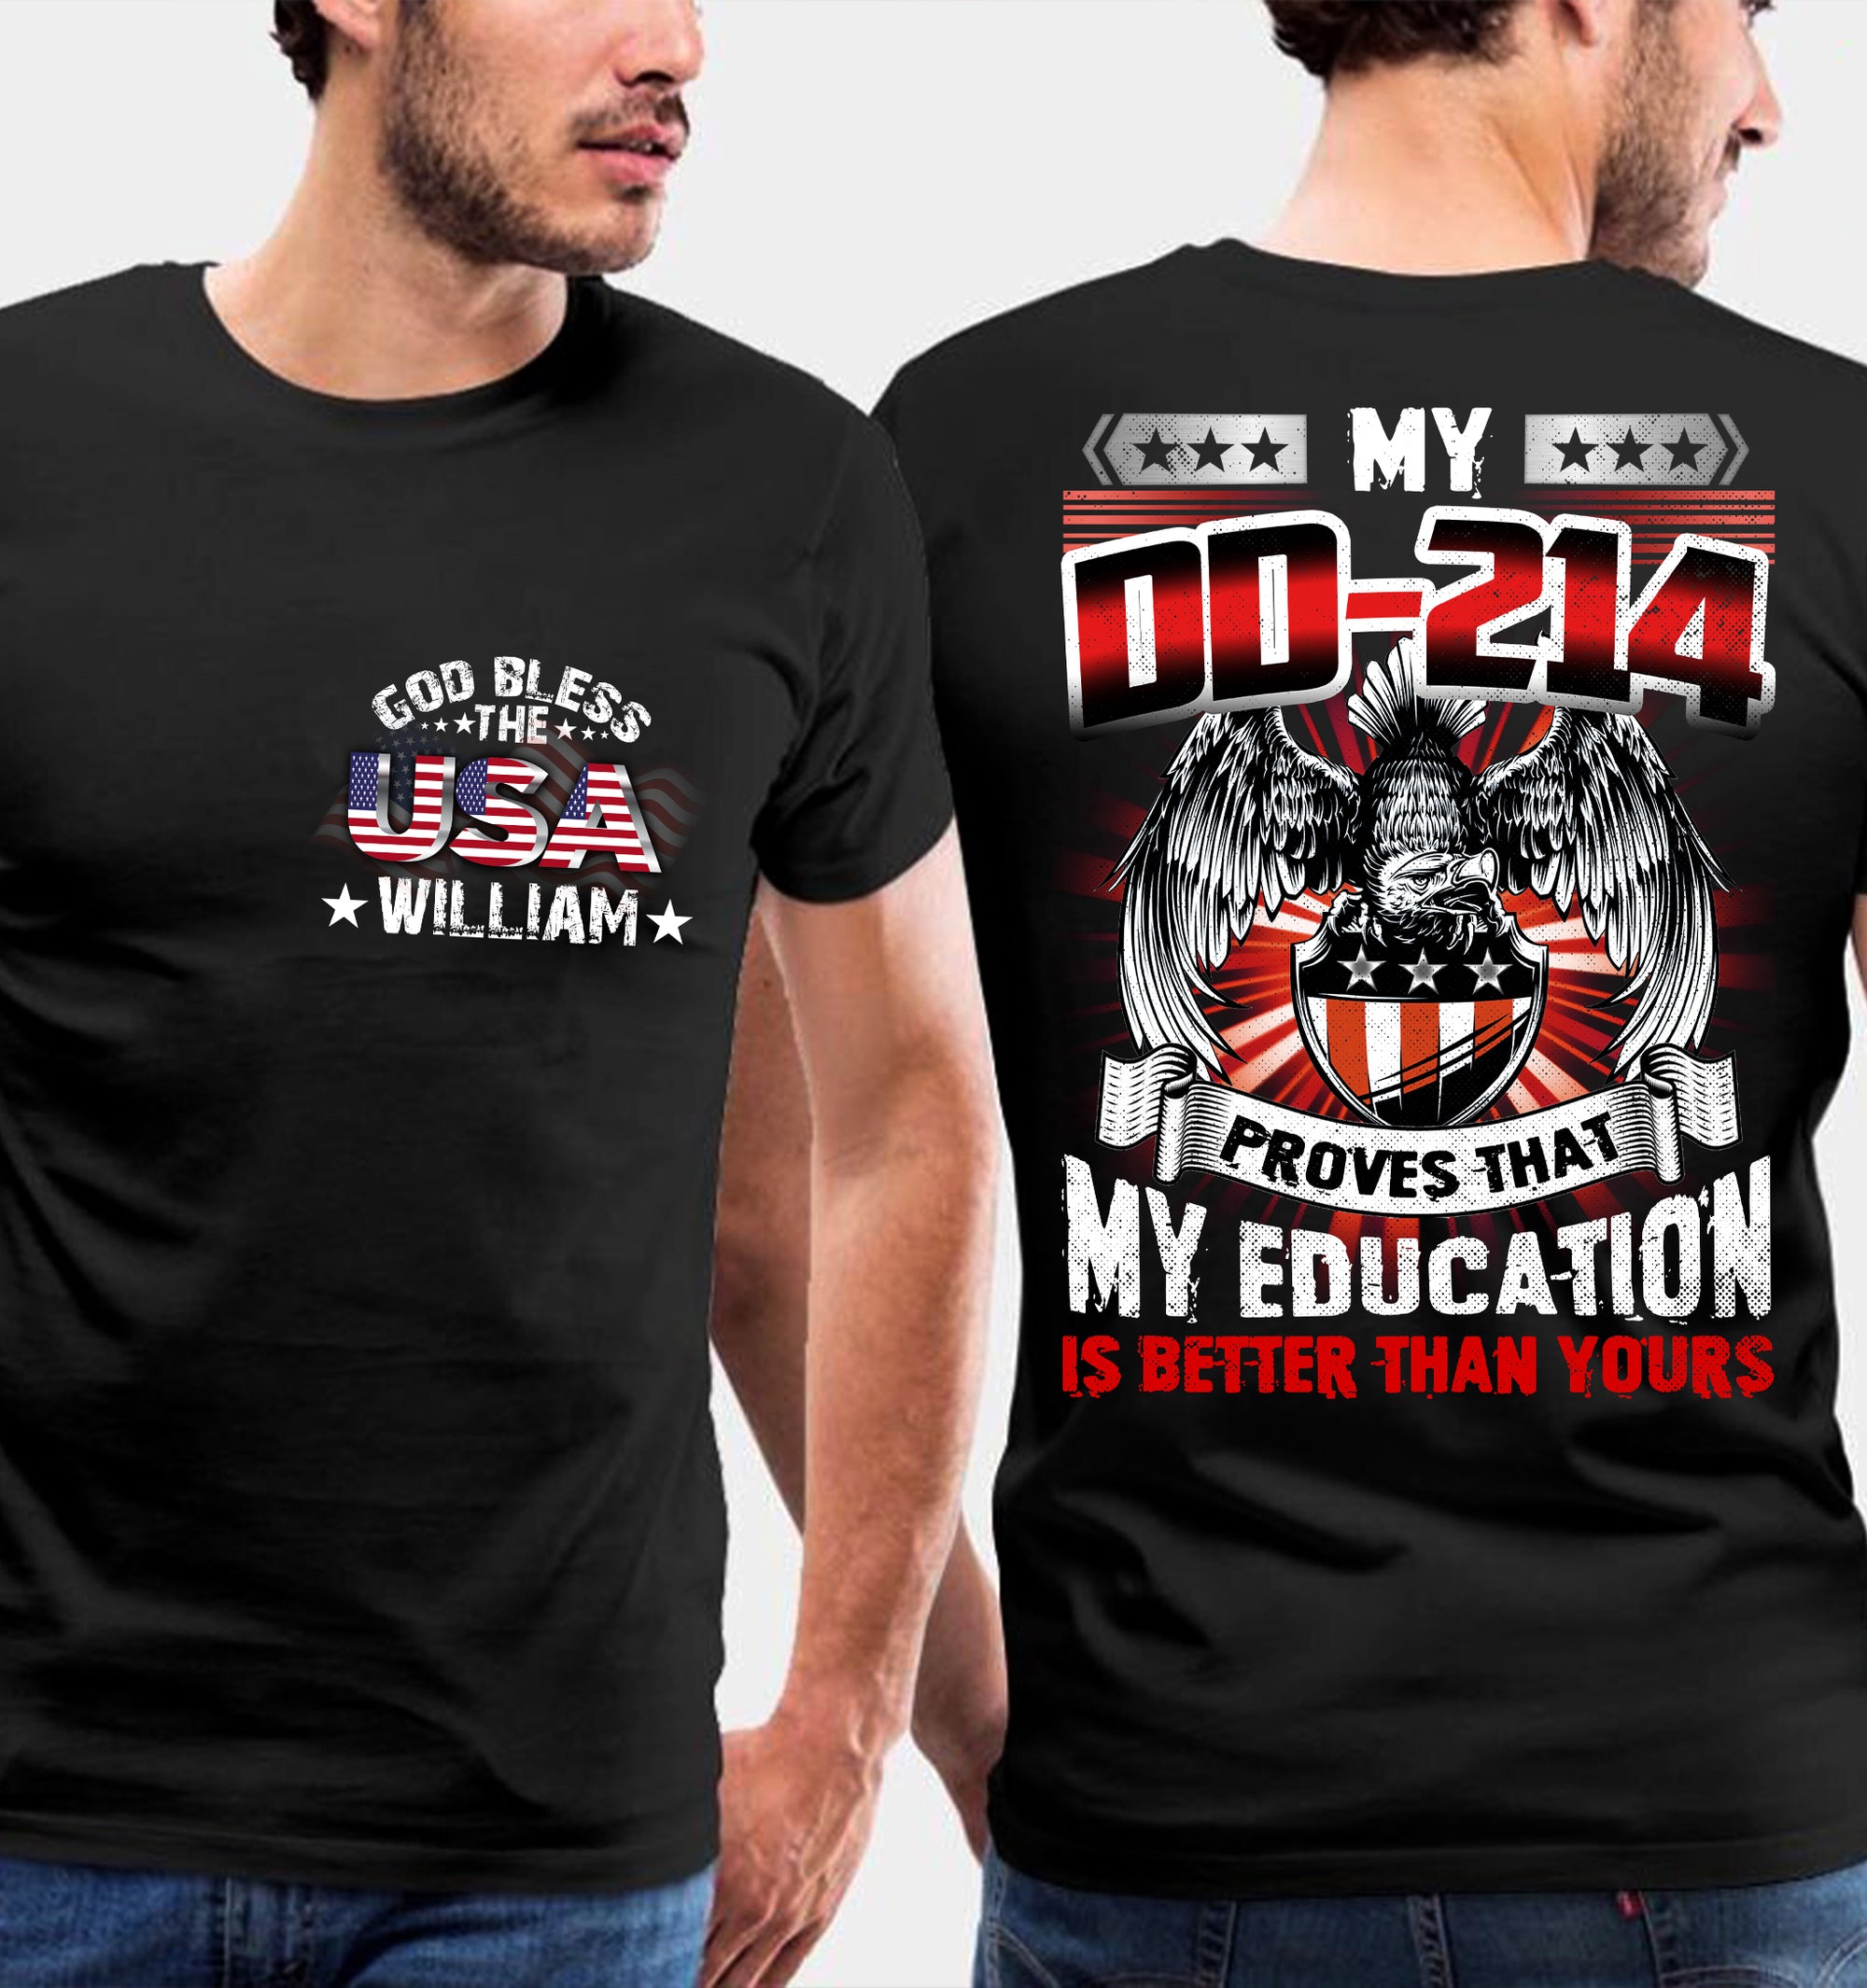 My DD-214 Proves That My Education Is Better Than Yours- Personalized Veteran T-Shirt, Gift For Veterans